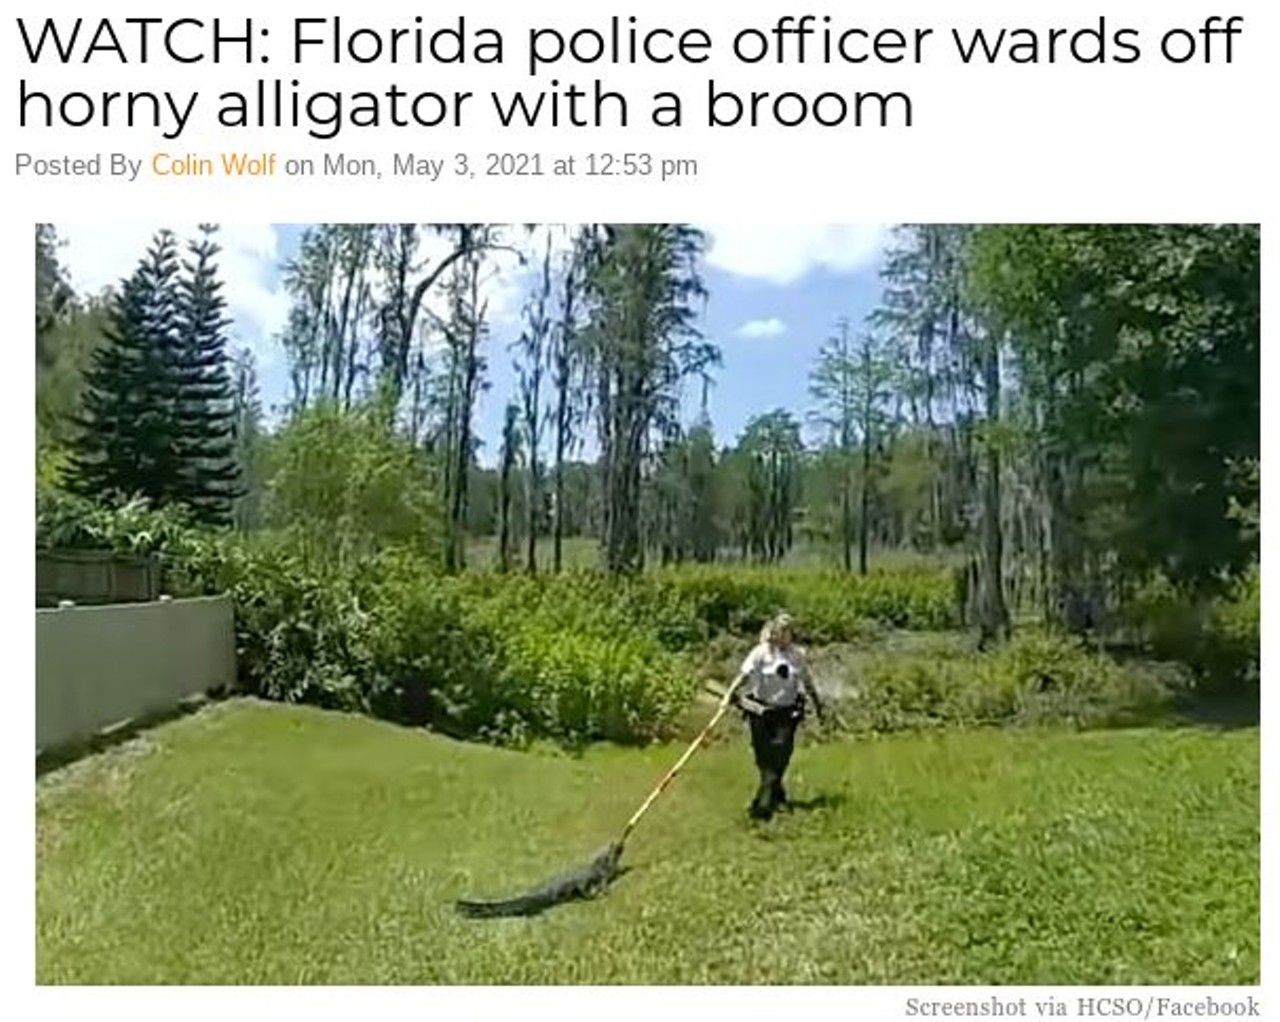 WATCH: Florida police officer wards off horny alligator with a broom
